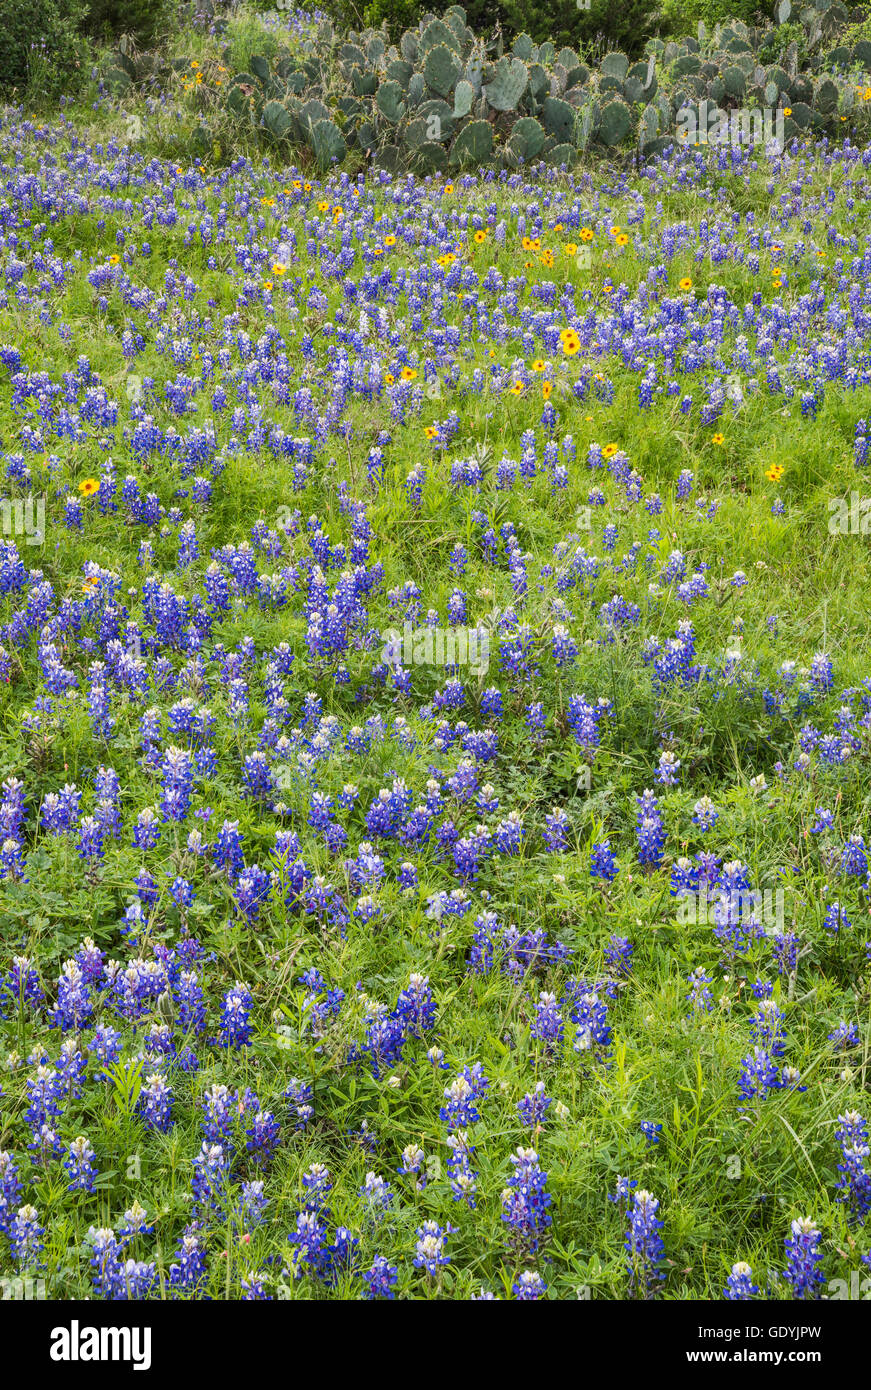 Field of bluebonnets (Lupinus texensis) at Willow City Loop in Hill Country, Texas, USA Stock Photo